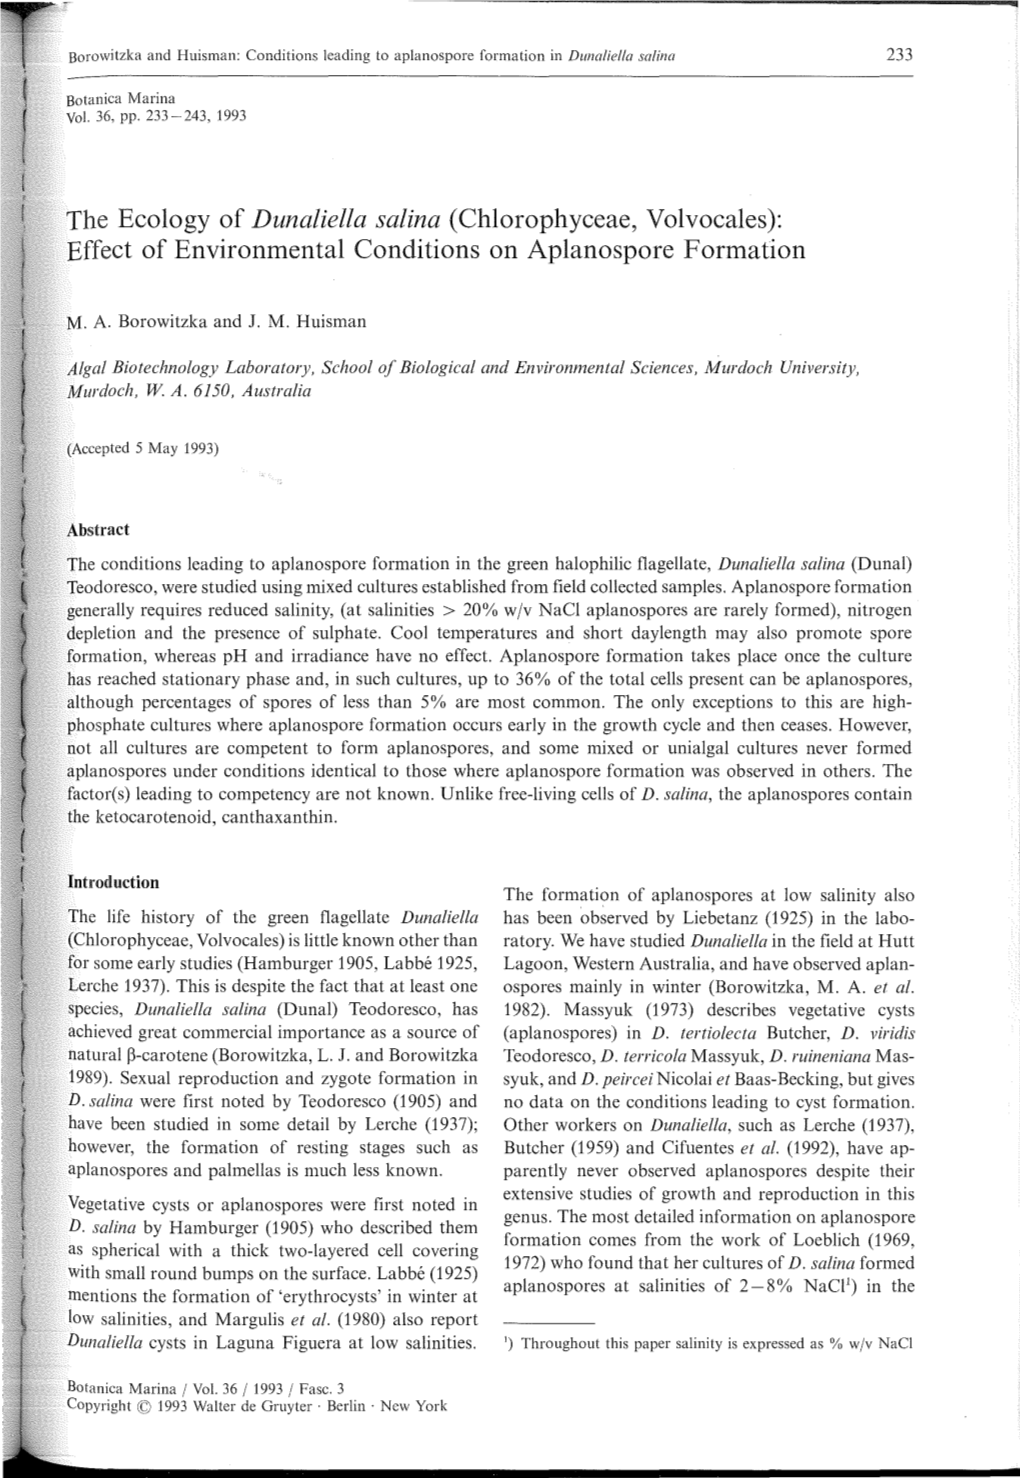 The Ecology of Dunaliella Salina (Chlorophyceae, Volvocales): Effect of Environmental Conditions on Aplanospore Formation